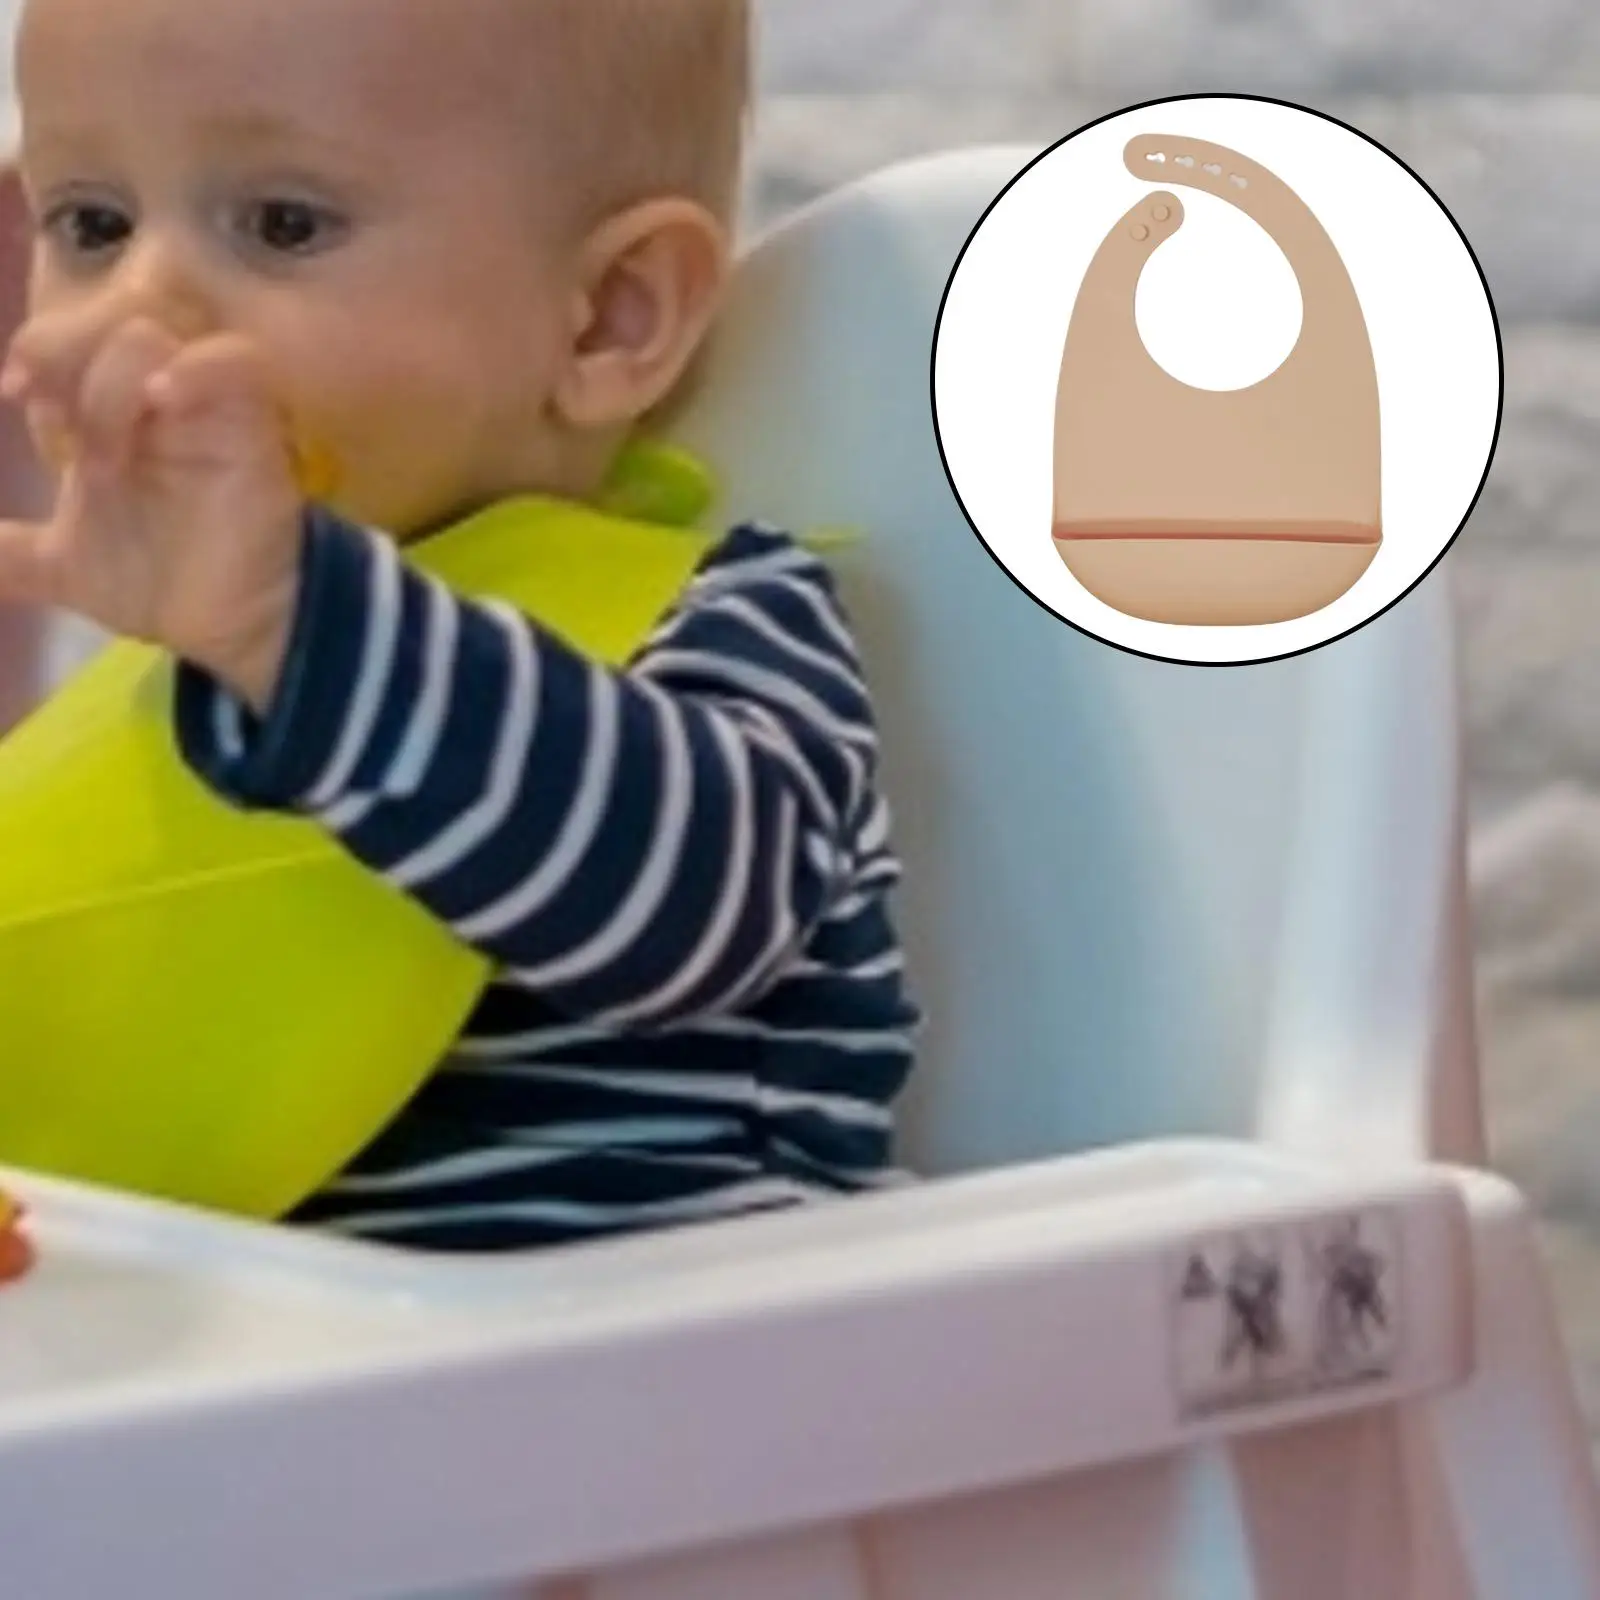 Adjustable Waterproof Silicone Baby Feeding Bib Eating Drinking Apron Cloth Protection for Toddler Wipe Clean Ligthweight